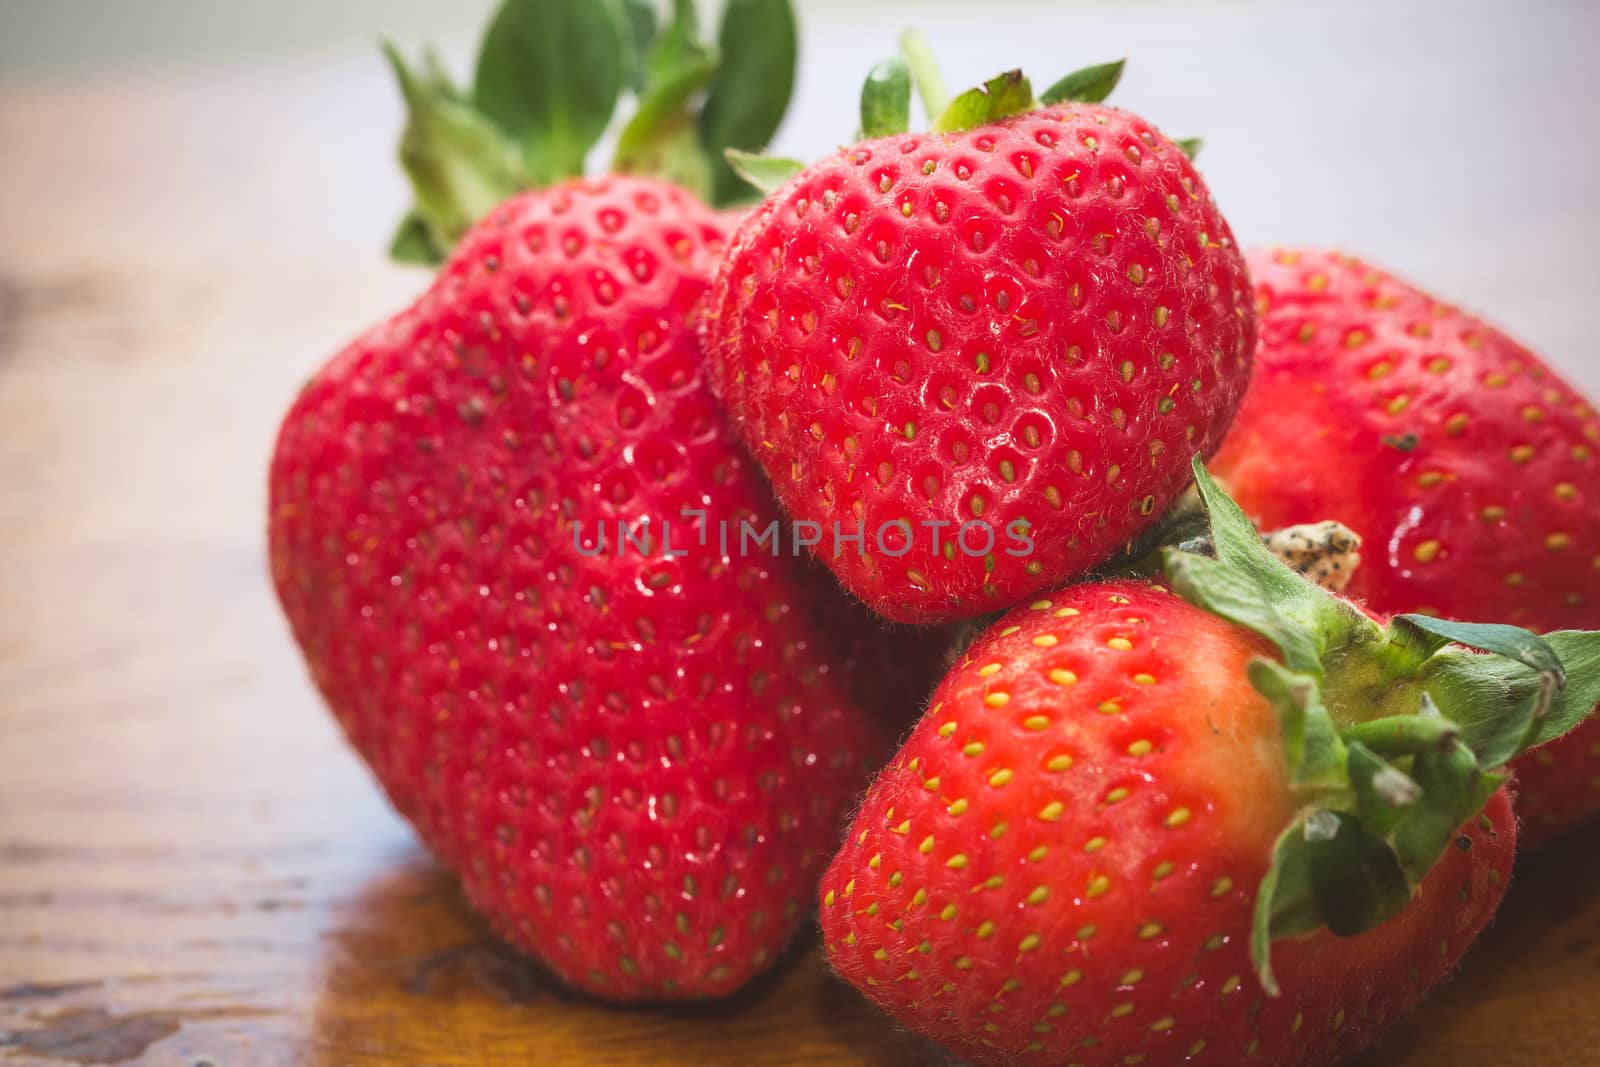 A pile of strawberries on a wooden table